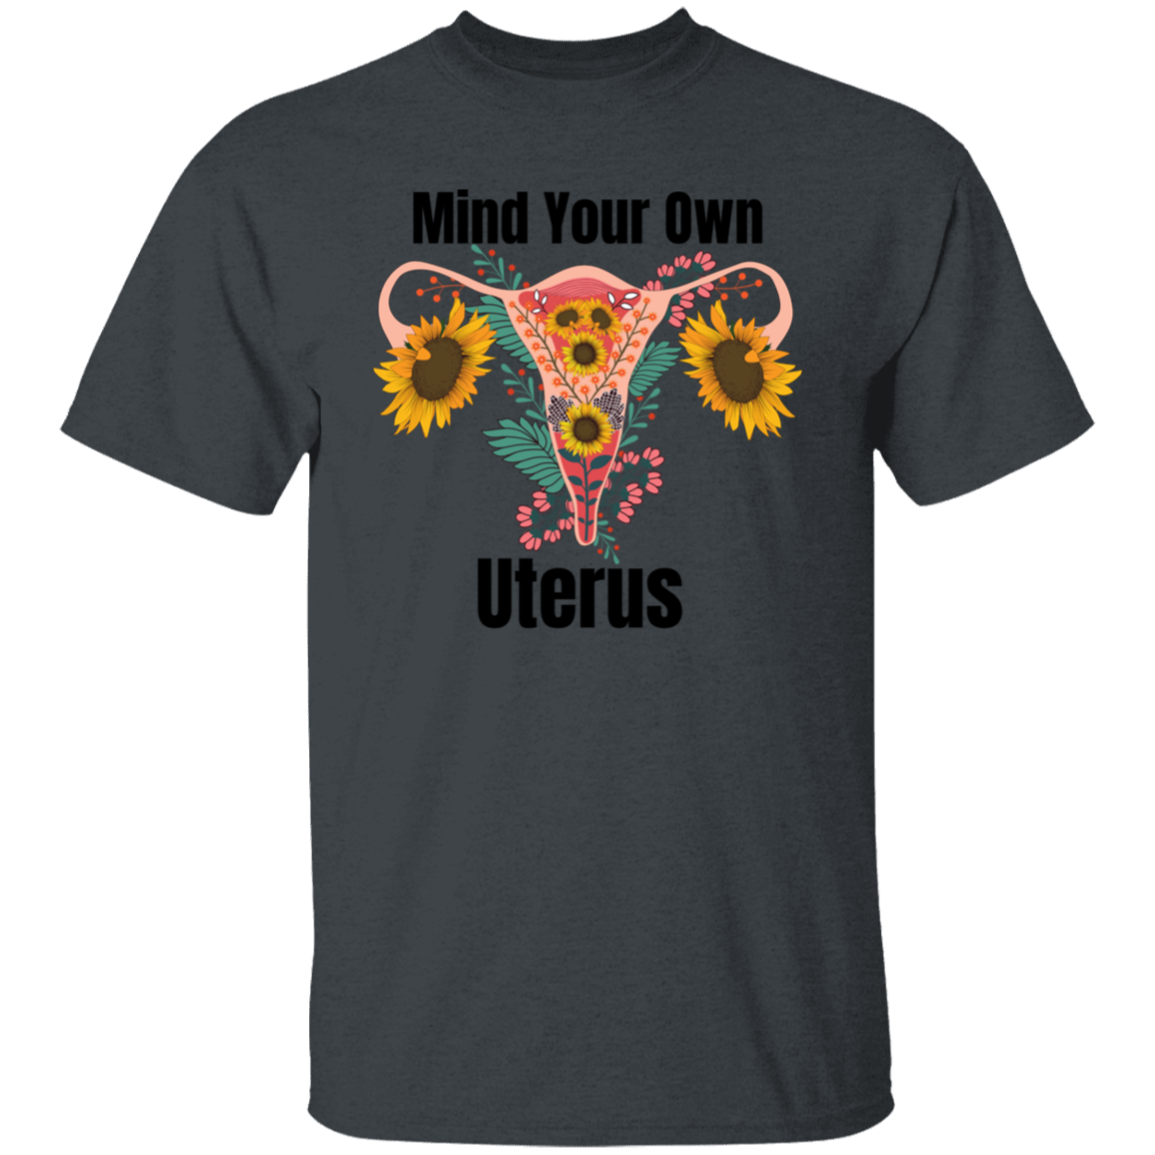 Unisex Mind Your Own Uterus Shirt, Reproductive Rights Tee, Women's Rights Top